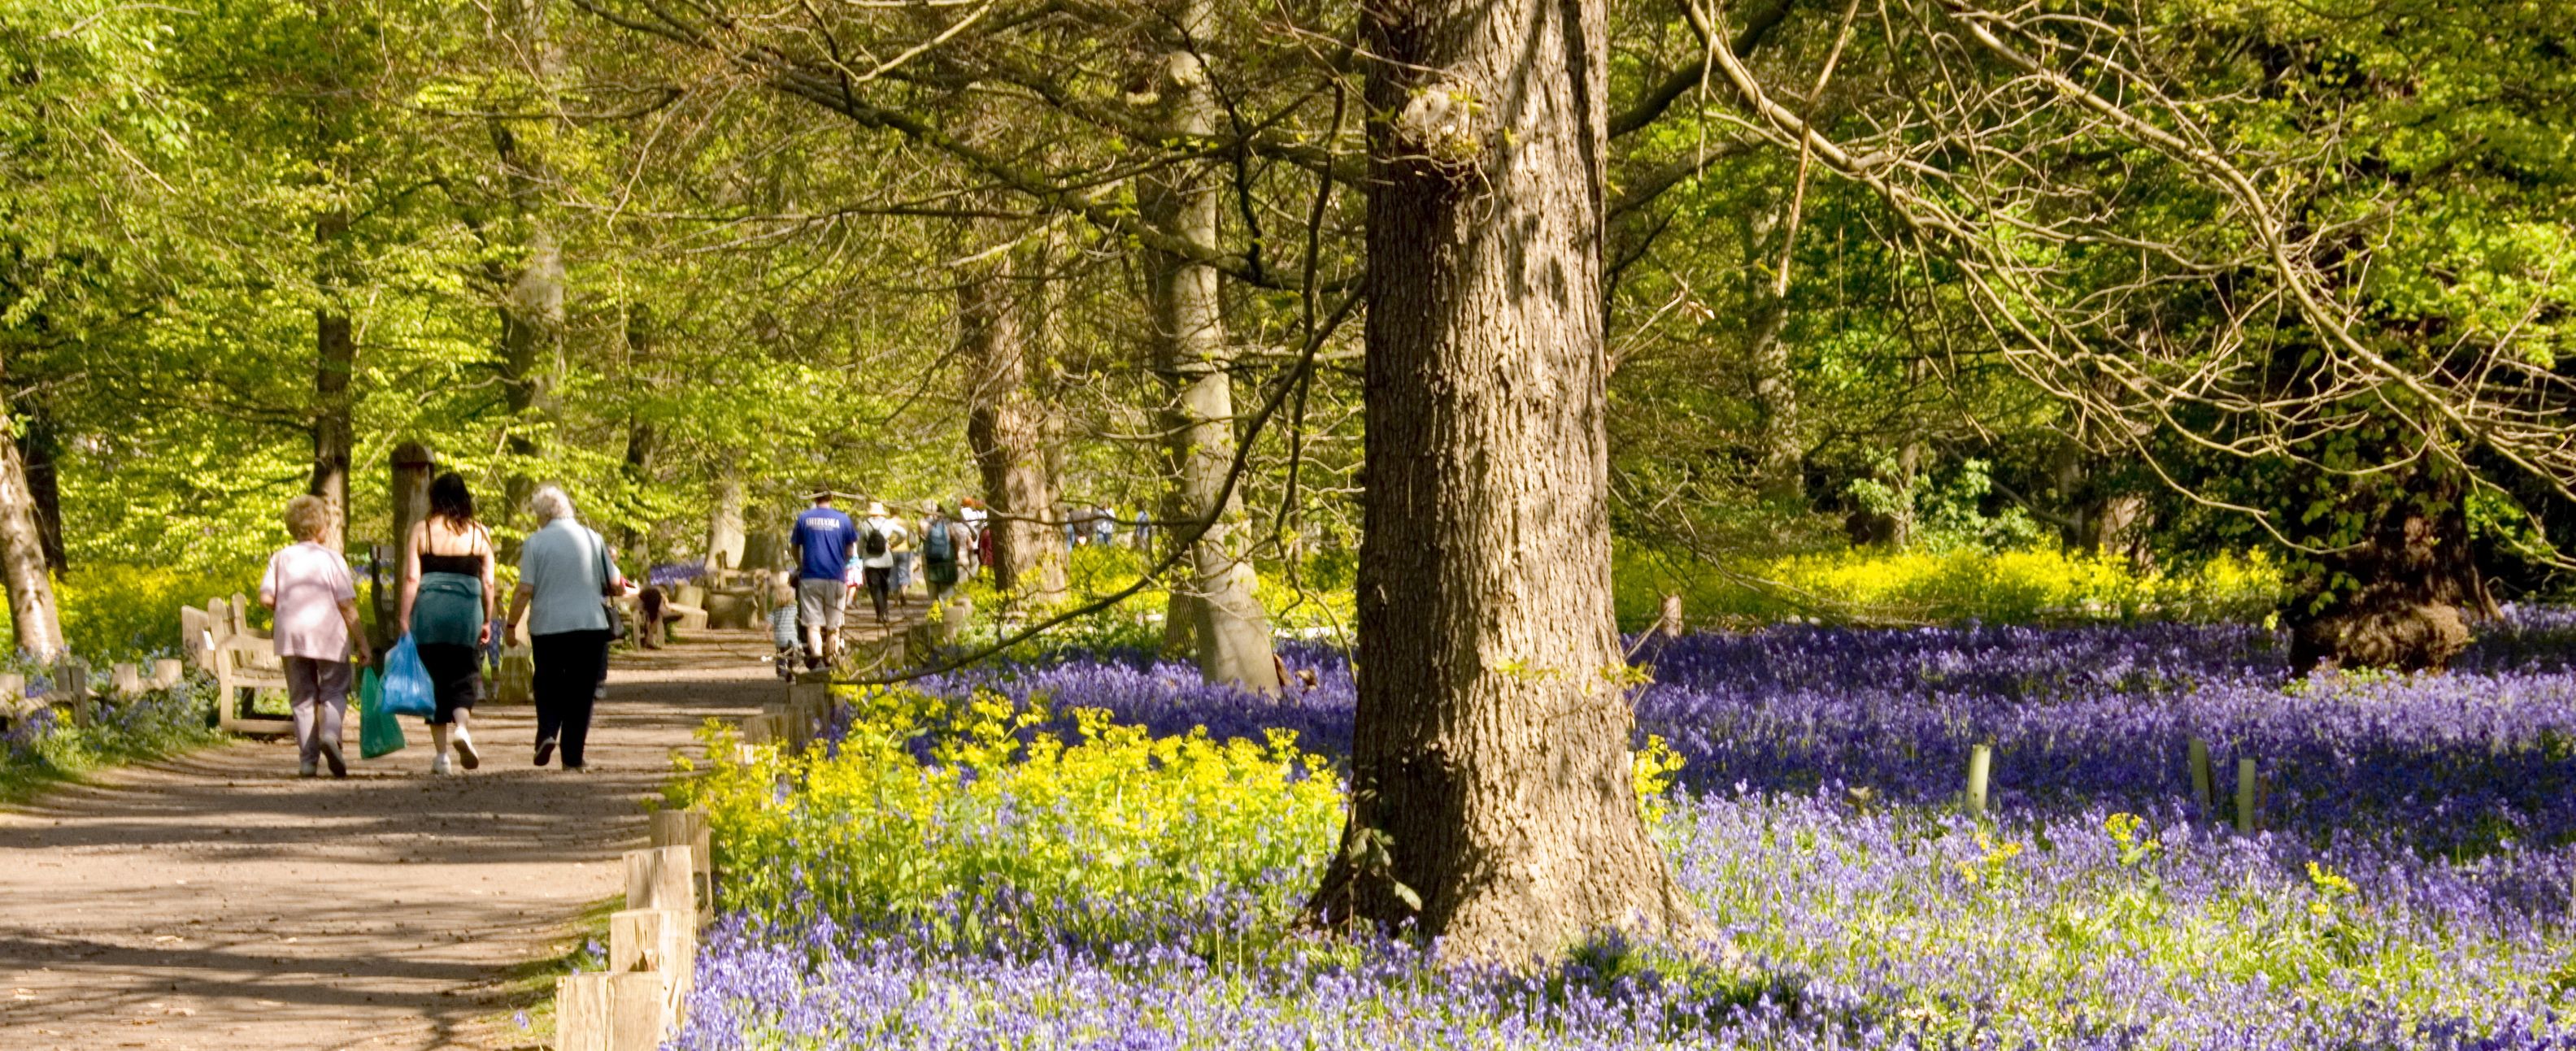 Annual Bluebell Walk for Cancer Research UK at Kew - Parenting ...